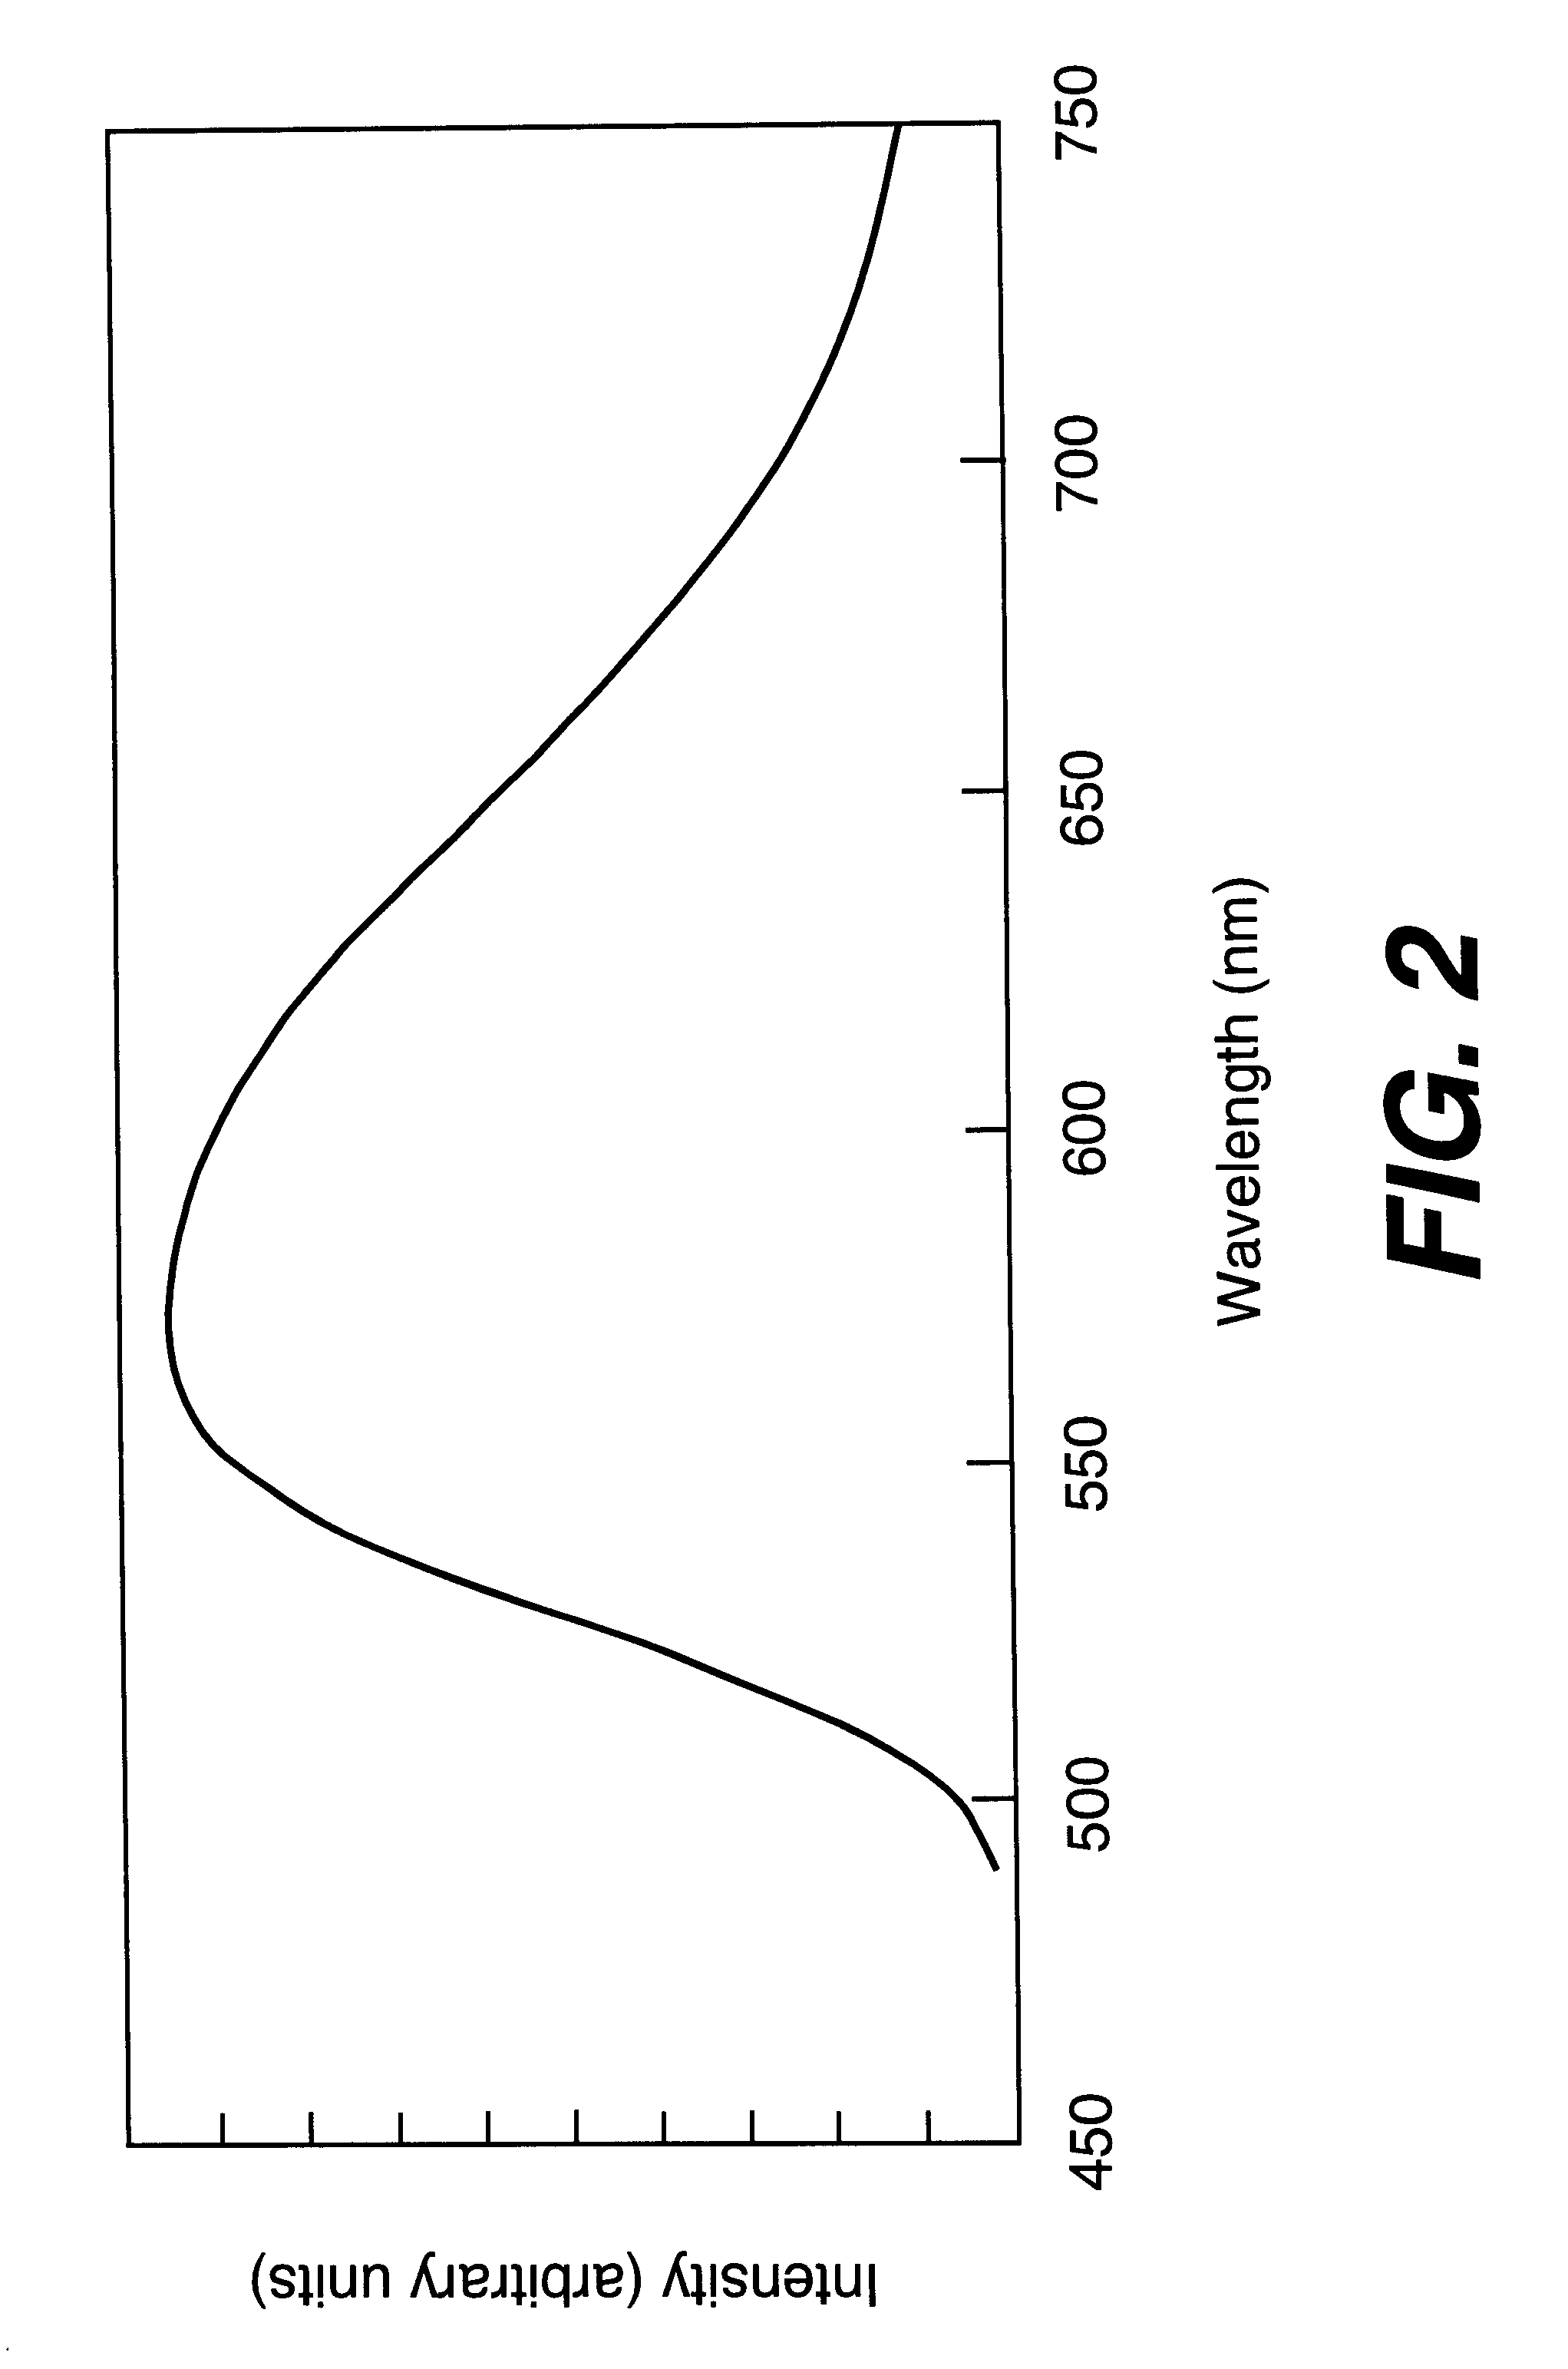 Broad-spectrum terbium-containing garnet phosphors and white-light sources incorporating the same